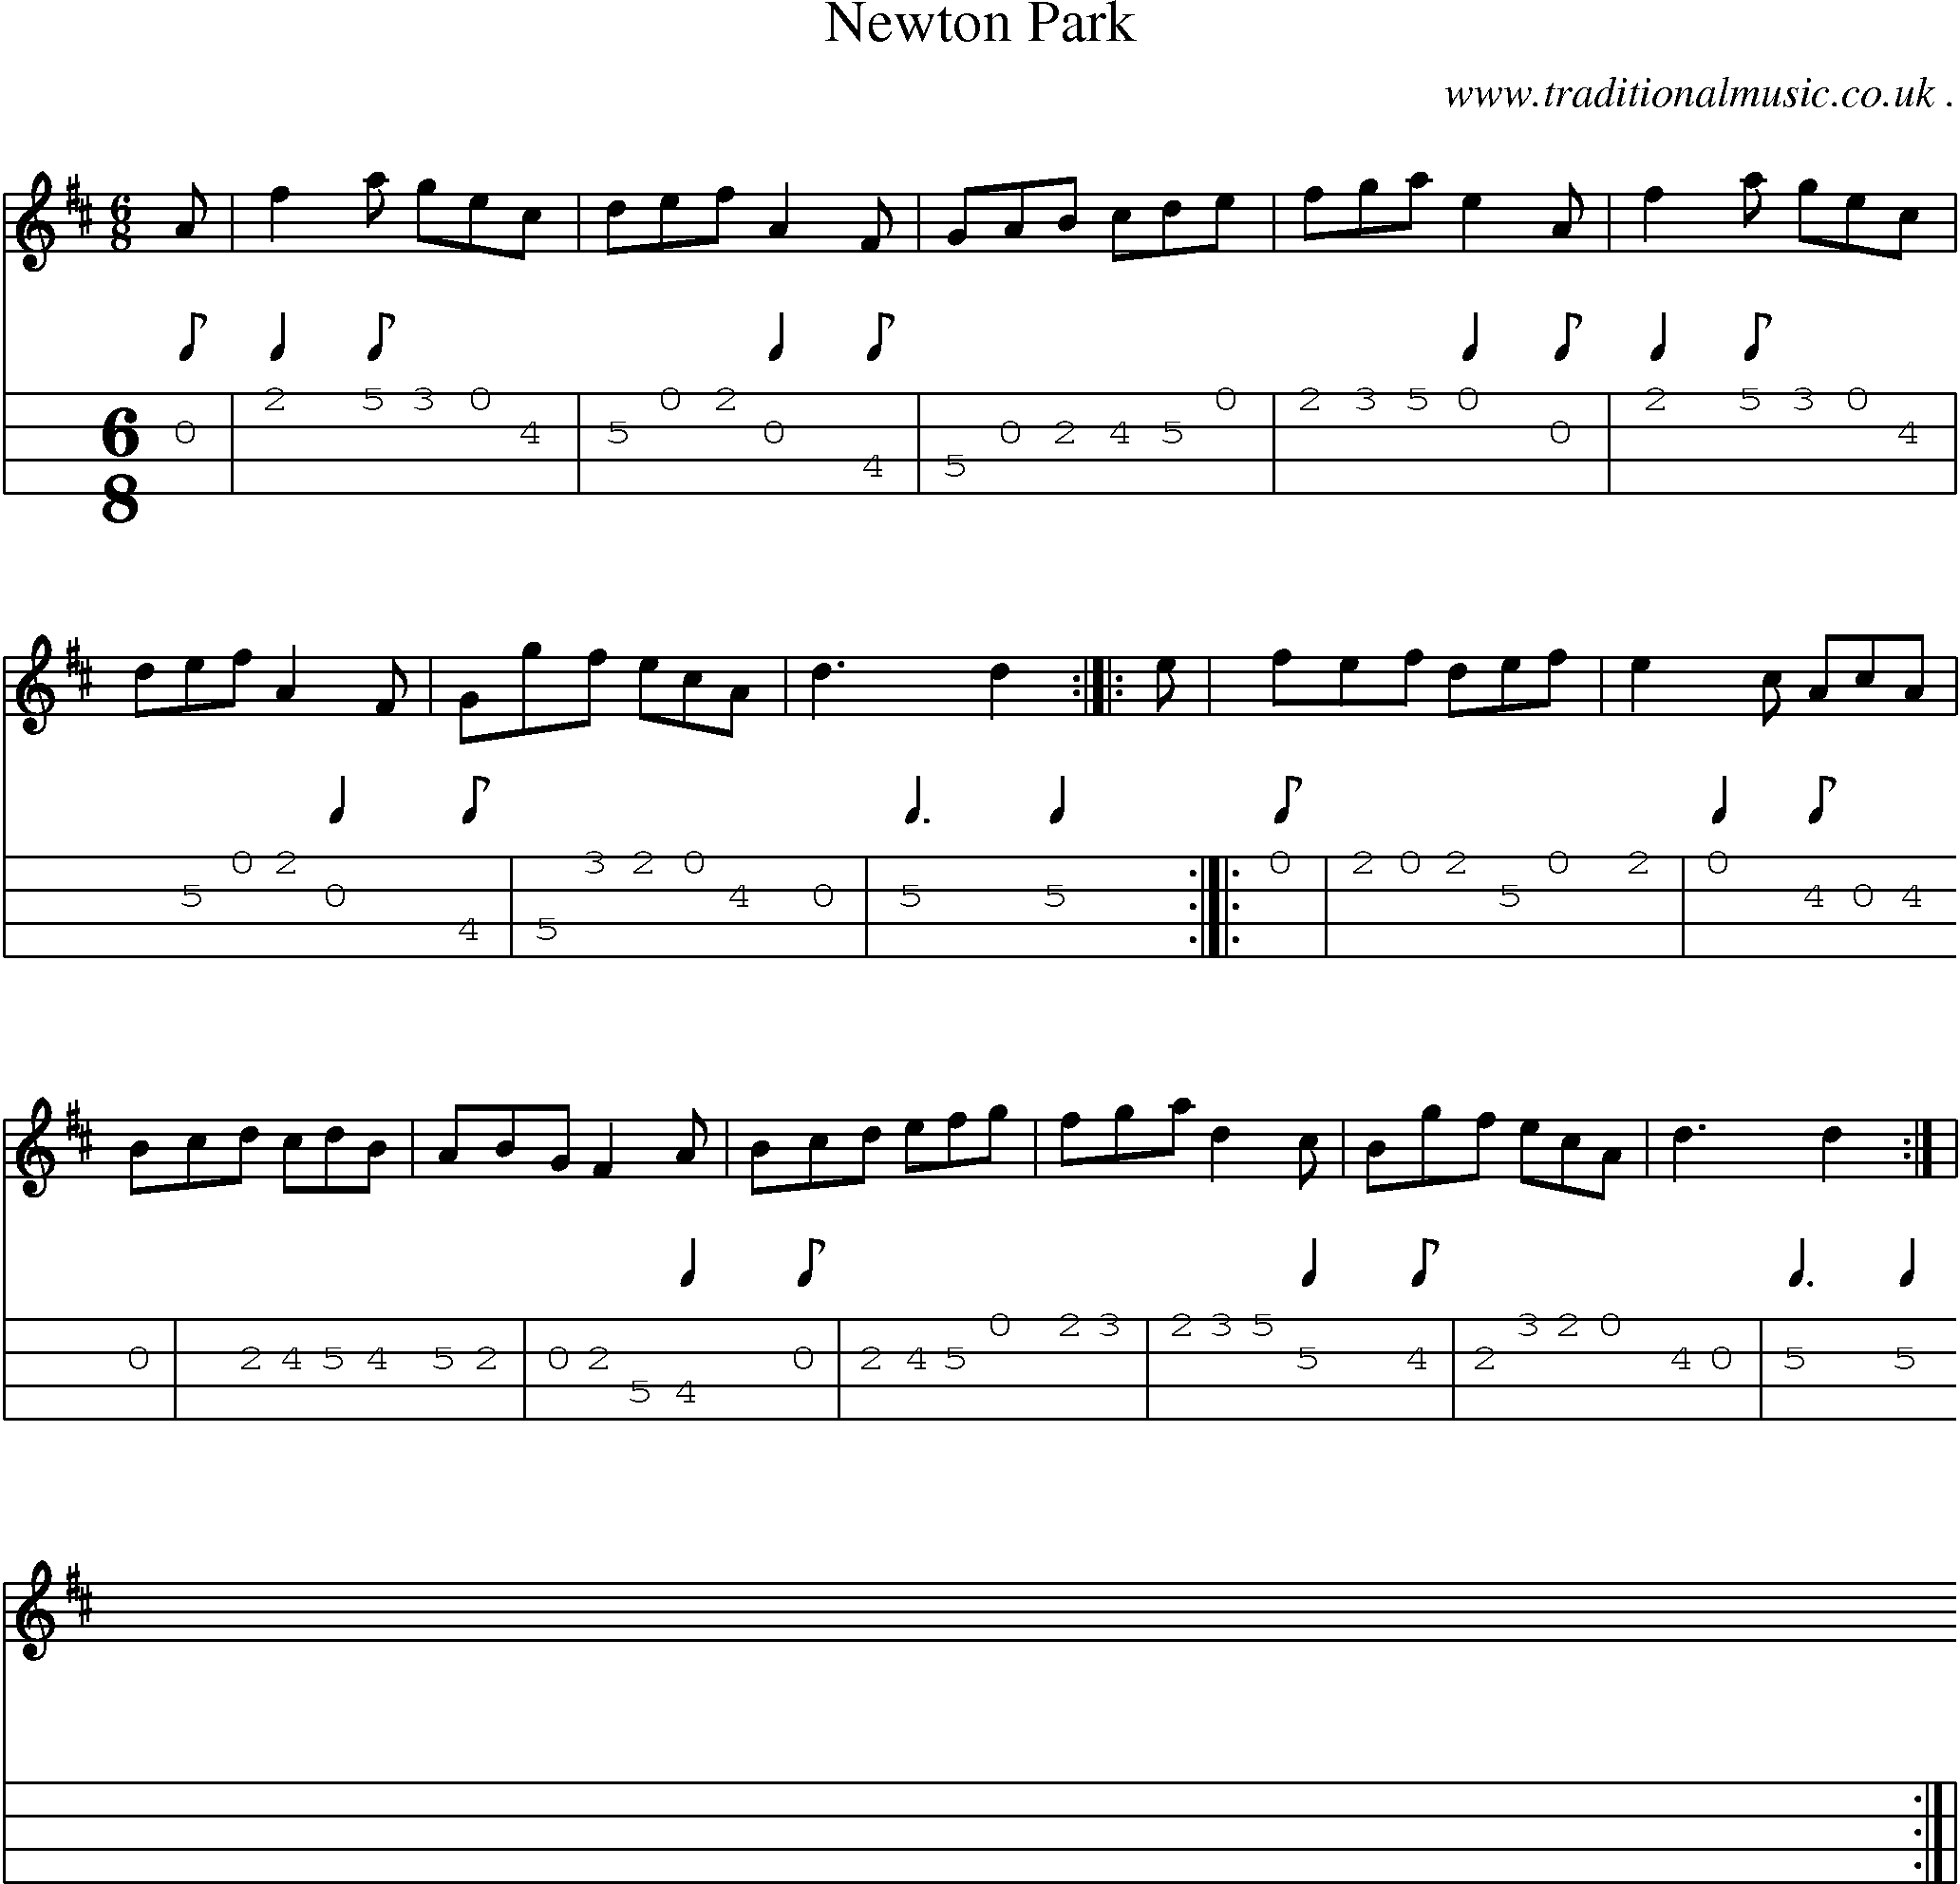 Sheet-music  score, Chords and Mandolin Tabs for Newton Park